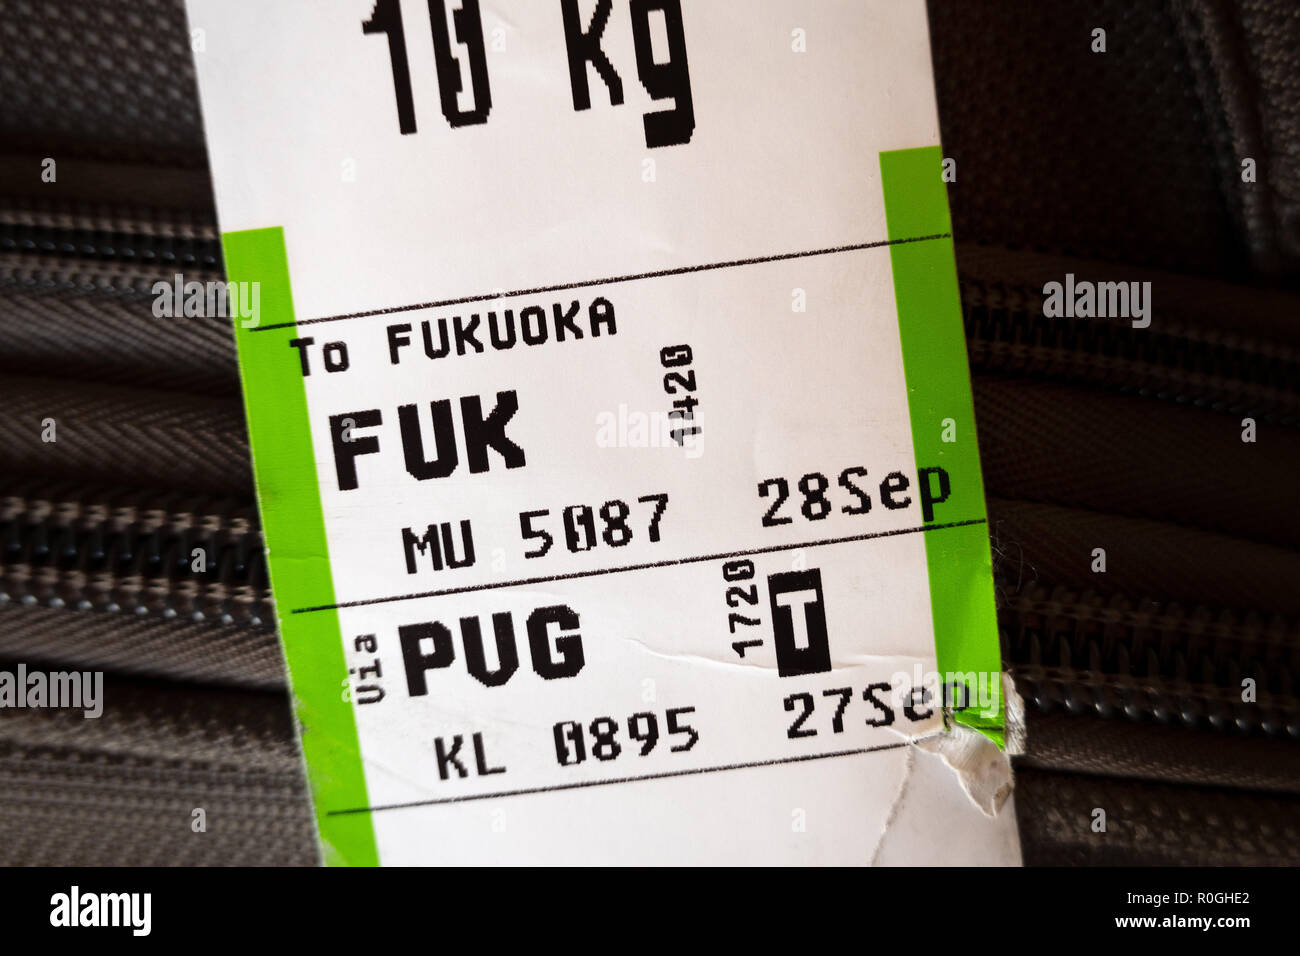 Checked baggage with airline luggage tags showing it's going from Shanghai PVG to Fukuoka FUK airports. Stock Photo